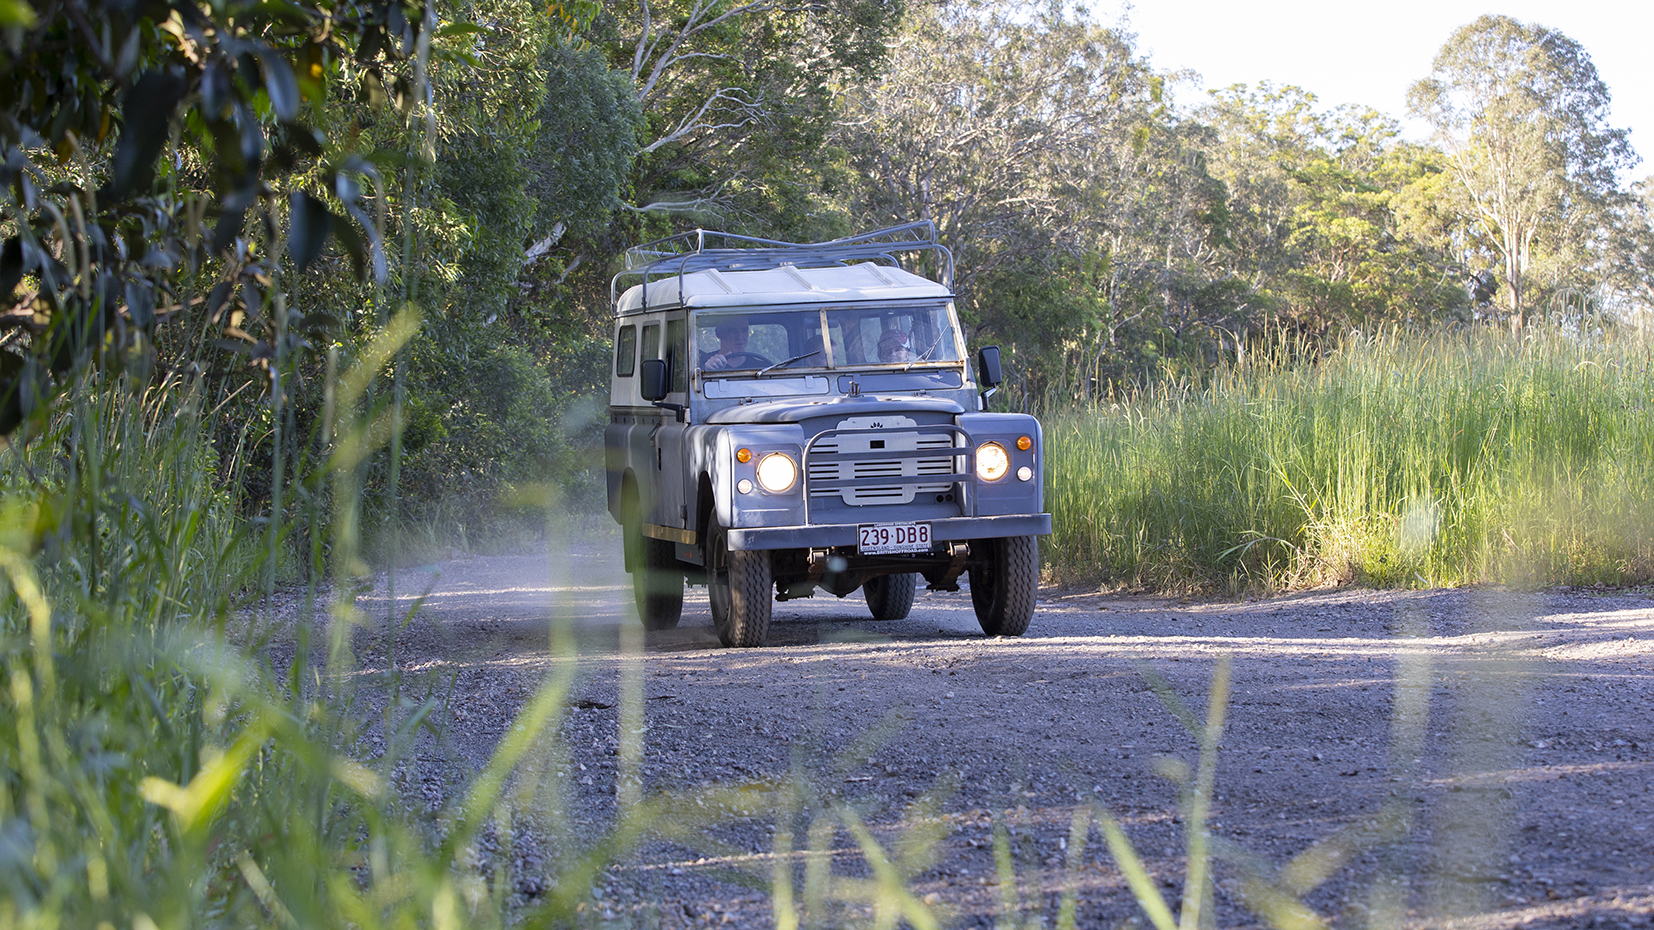 1974 Land Rover Series III with electric conversion